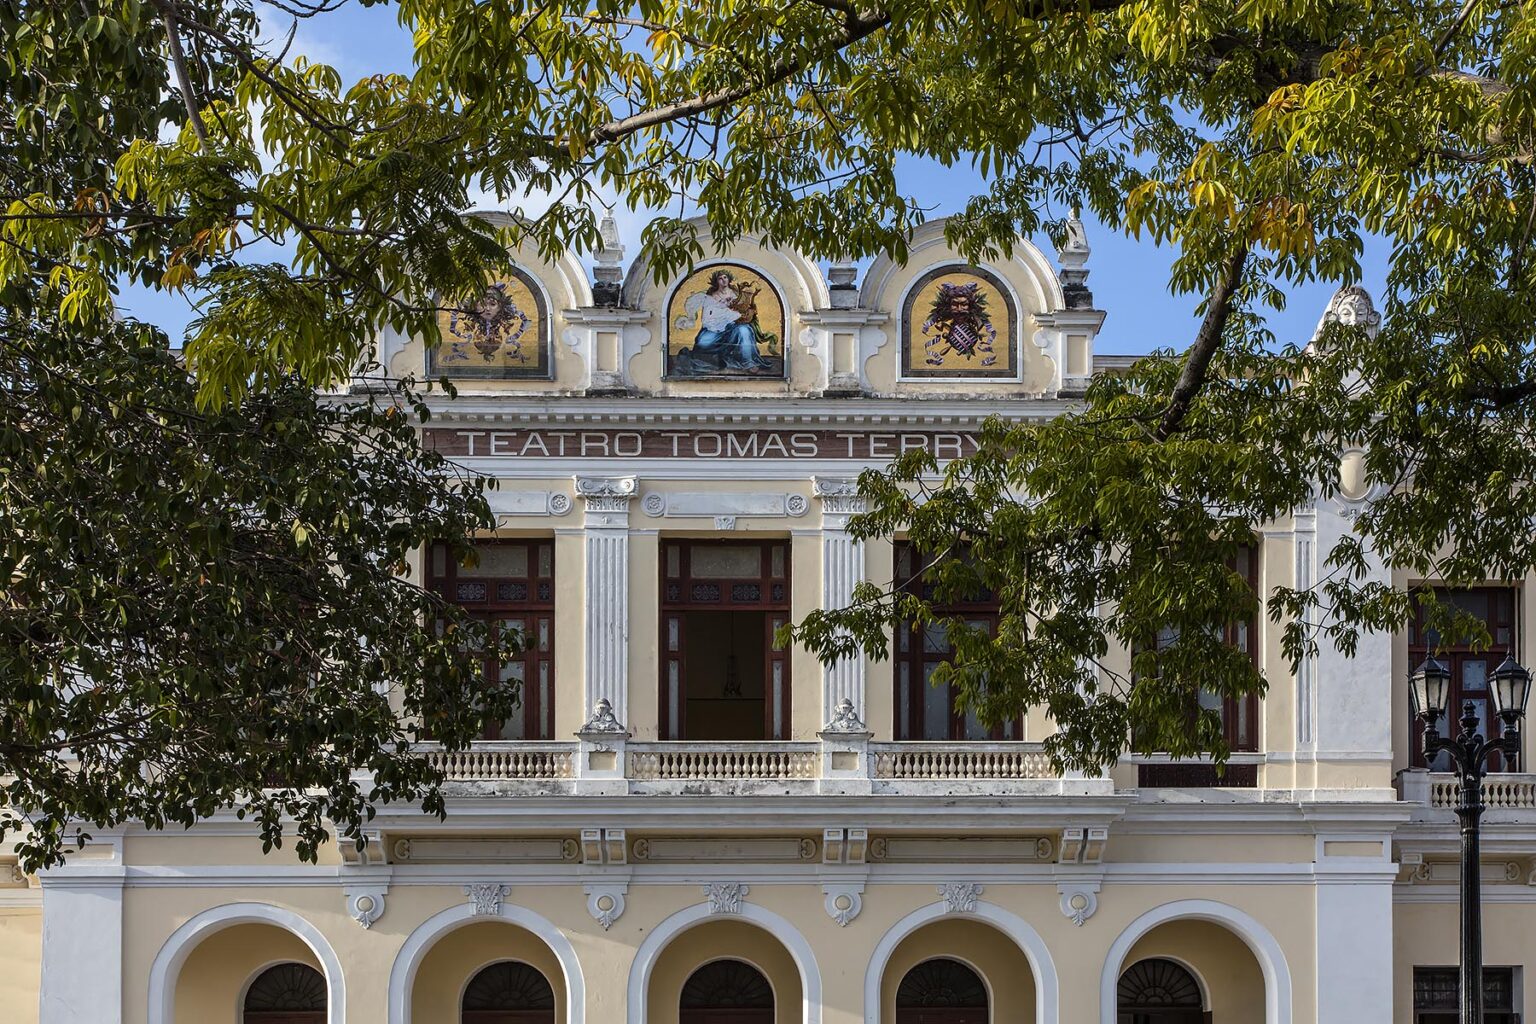 TEATRO TOMAS TERRY was built in 1887 with French and Italian influences and is located on the PARQUE JOSE MARTI - CIENFUEGOS, CUBA